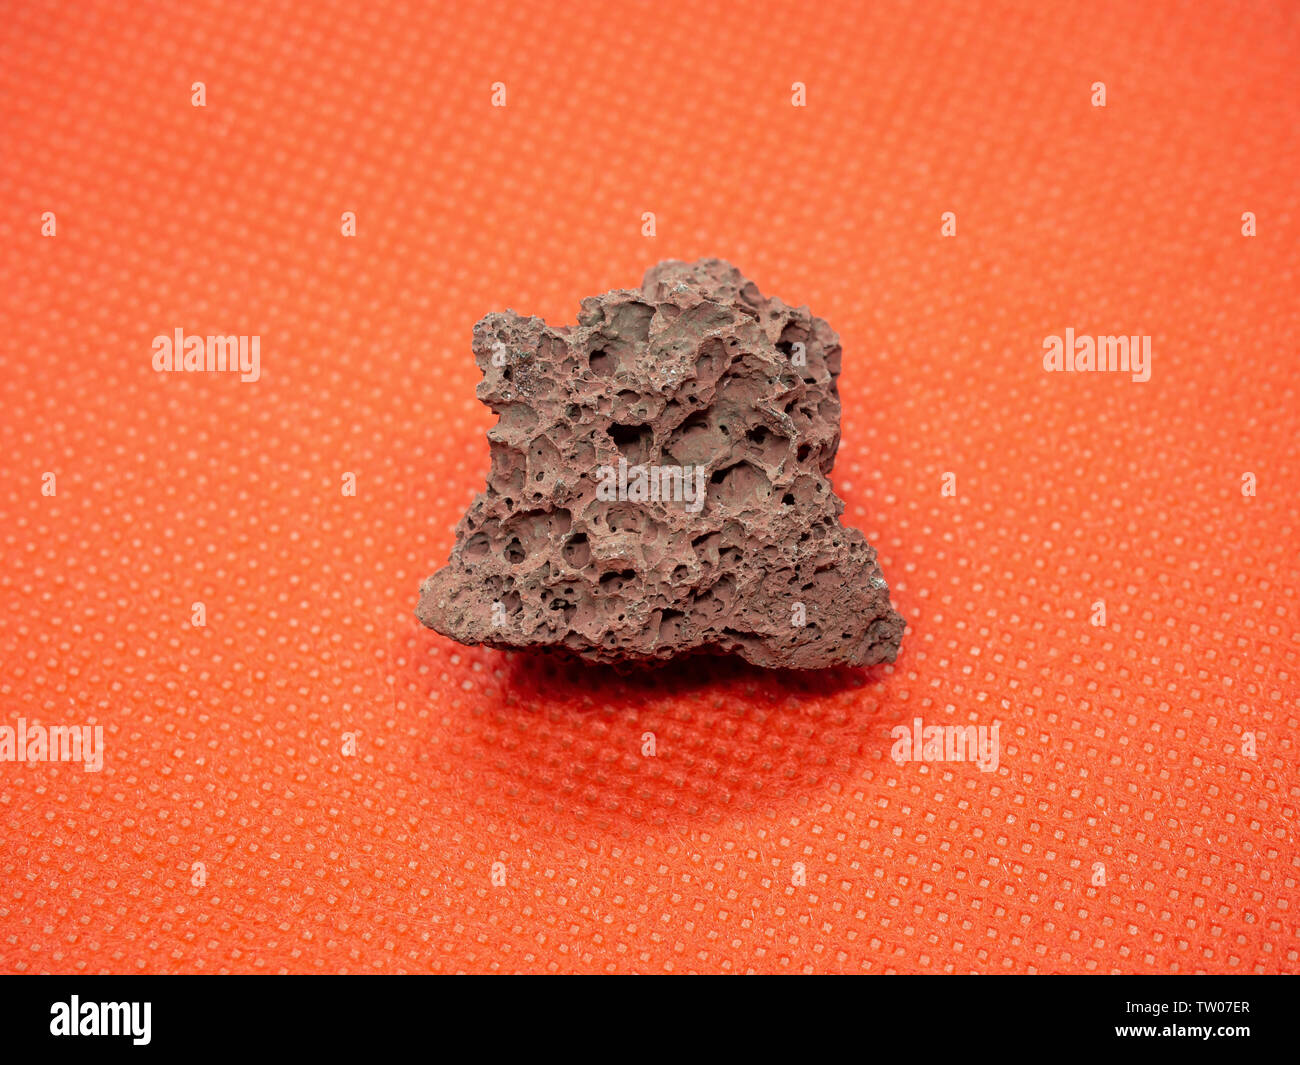 Geological specimen of natural red Pumice (pumicite, volcanic rock) on red background Stock Photo